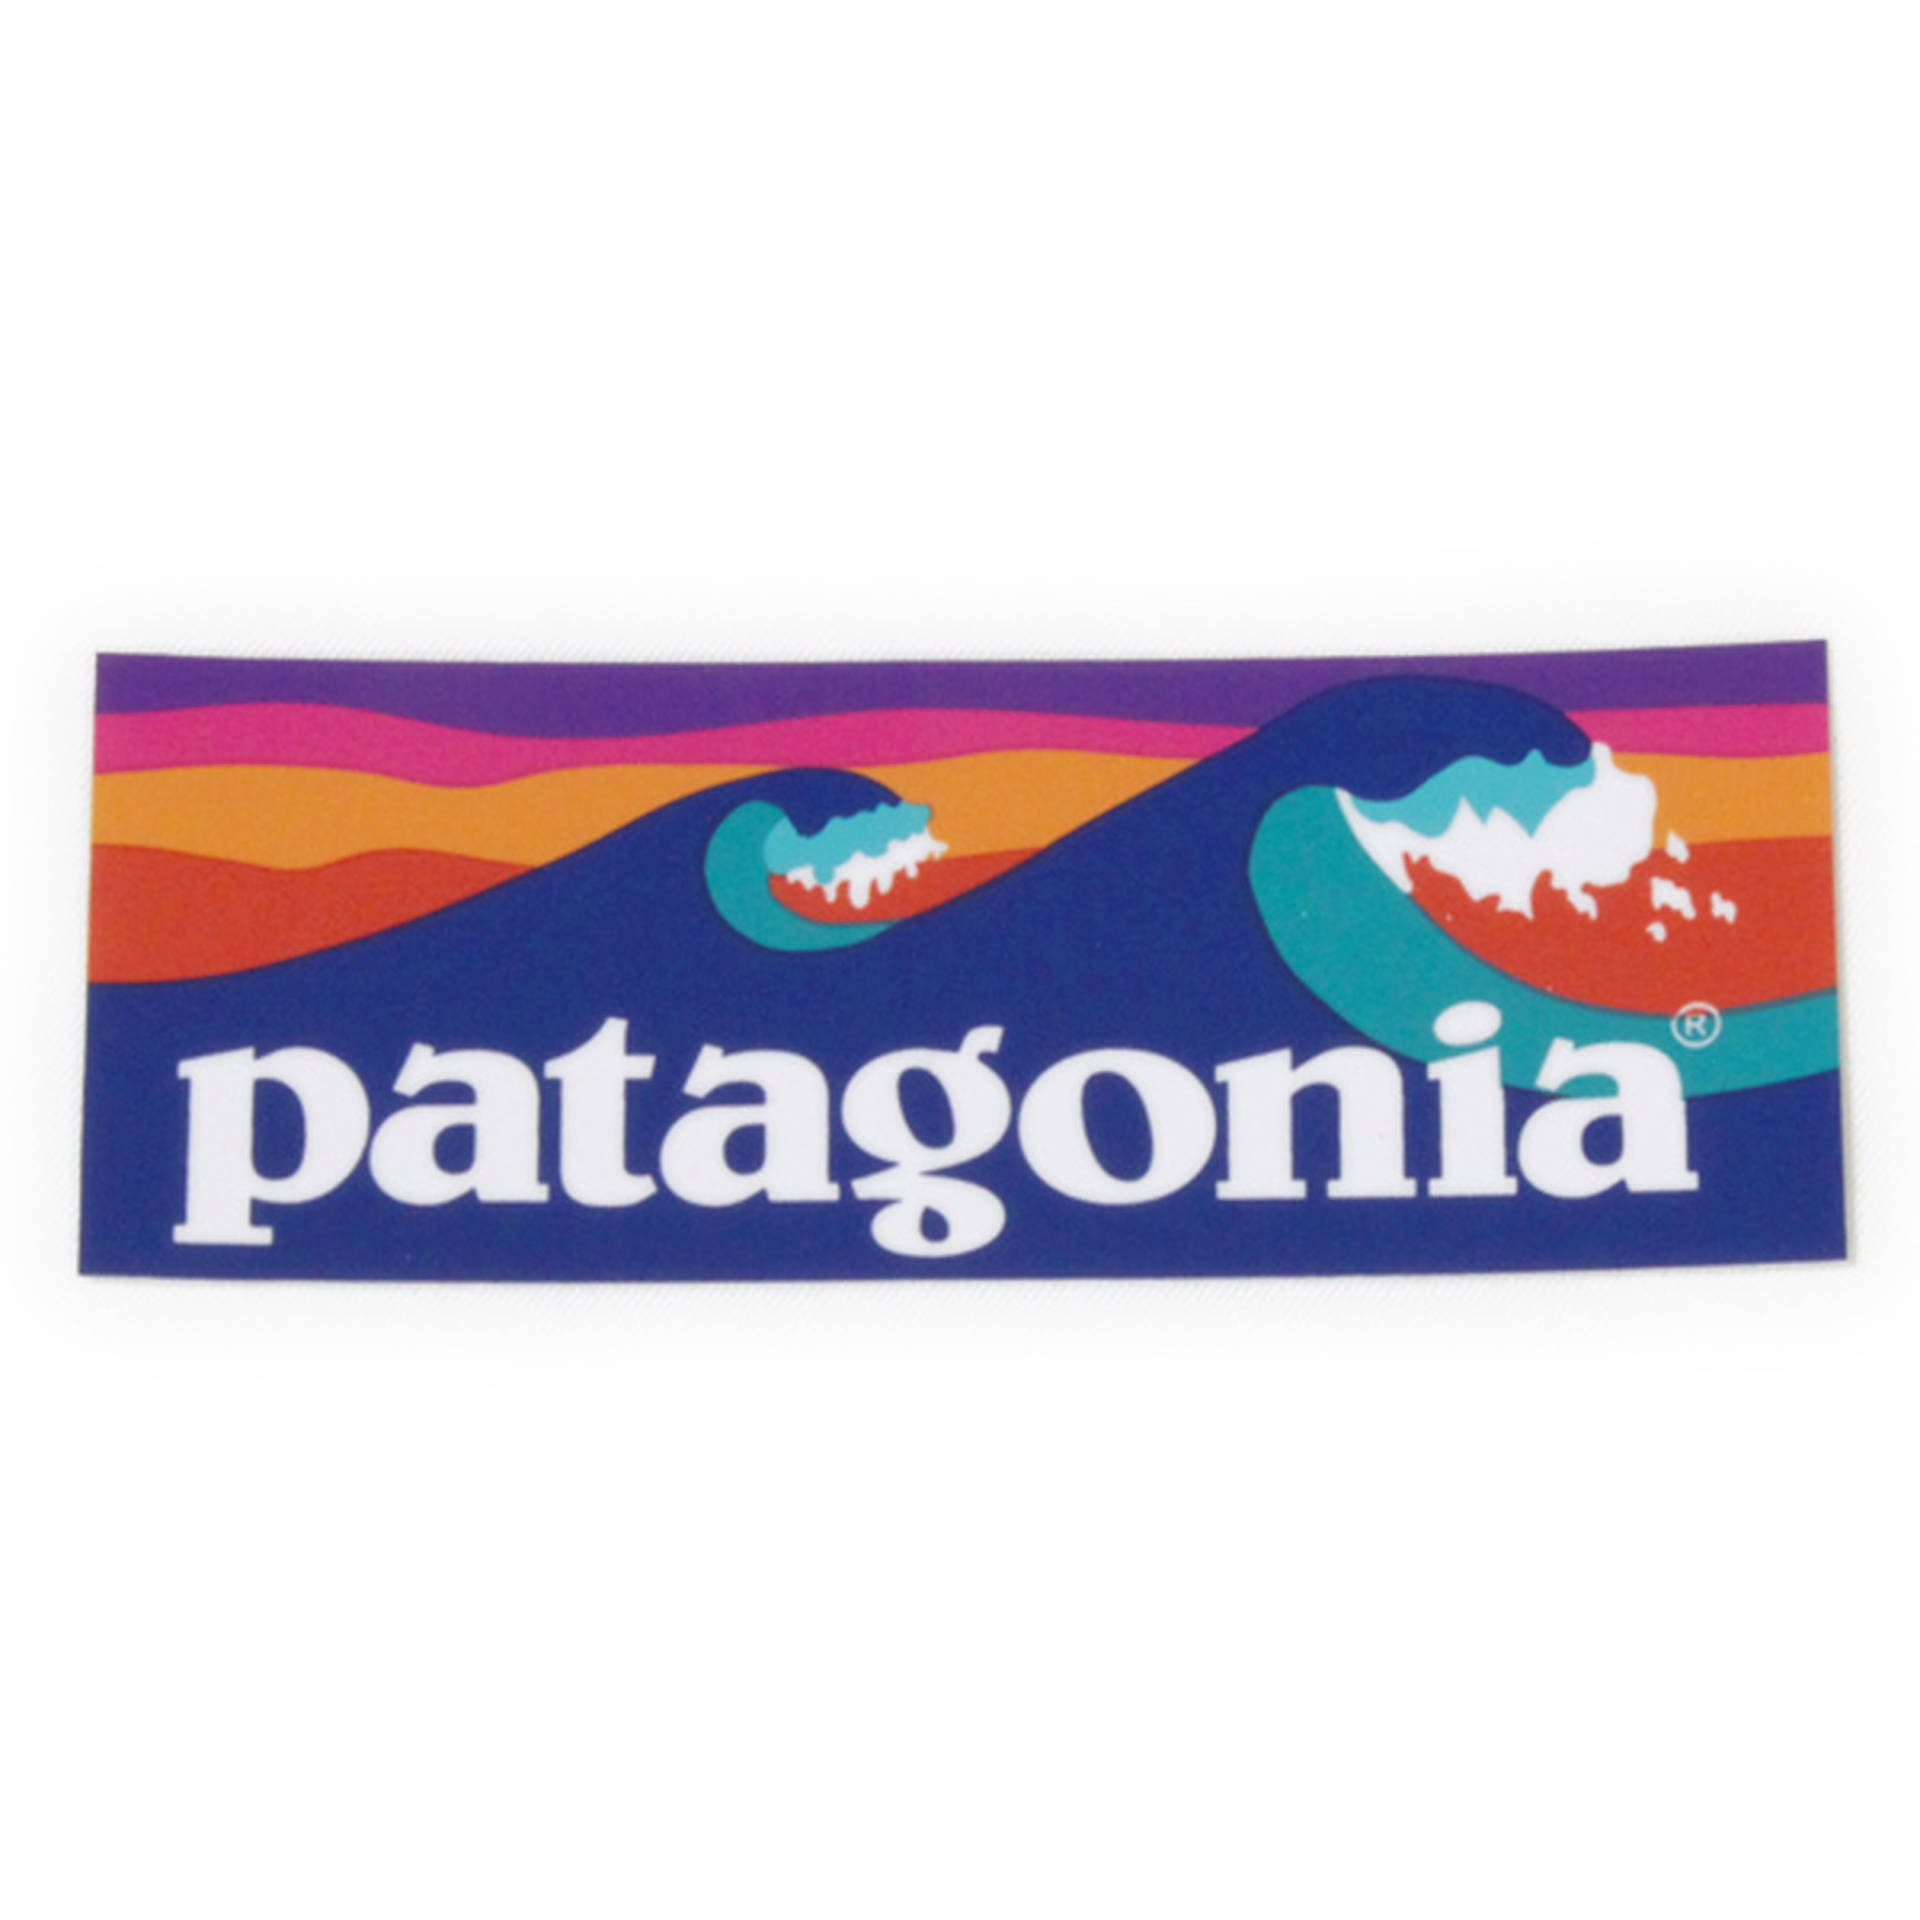 The Iconic Patagonia Logo Over Stunning Mountain Backdrop